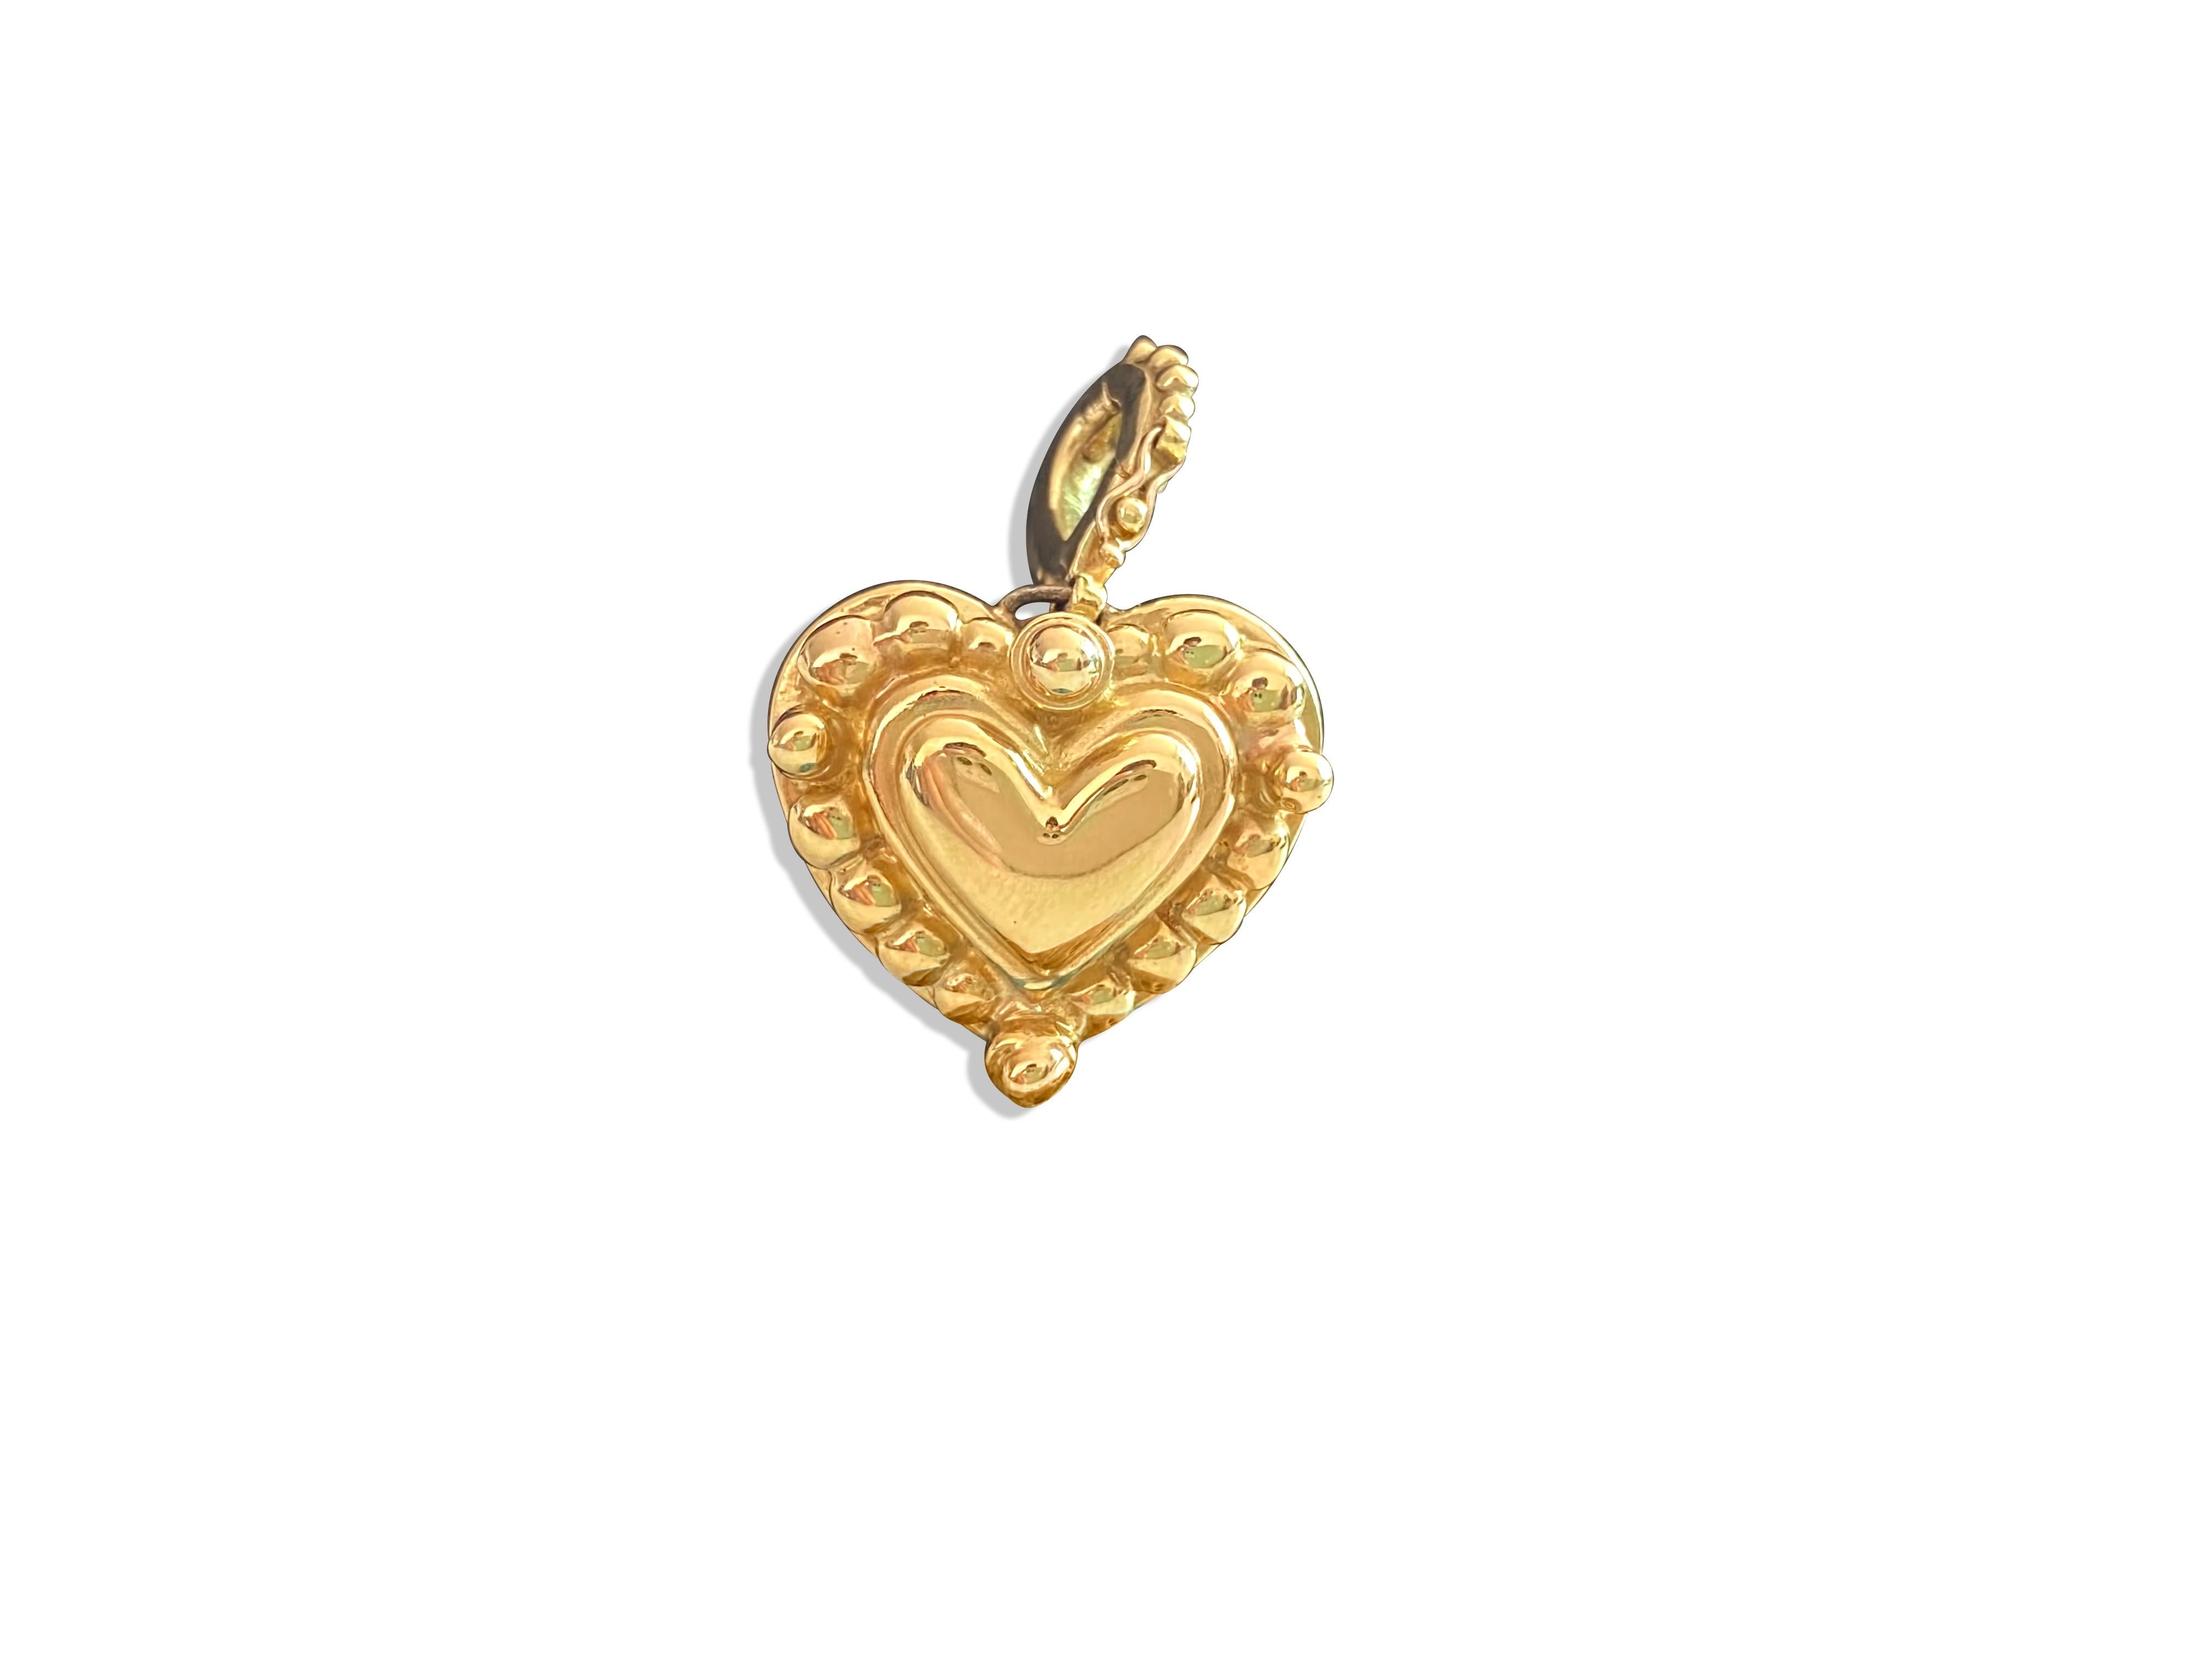 Fashioned from exquisite 18K yellow gold, this pendant boasts a total of 0.75 carats of dazzling diamonds, showcasing VVS clarity and F color for unparalleled brilliance. Adding to its allure, the pendant features 0.50 carats total weight of vibrant